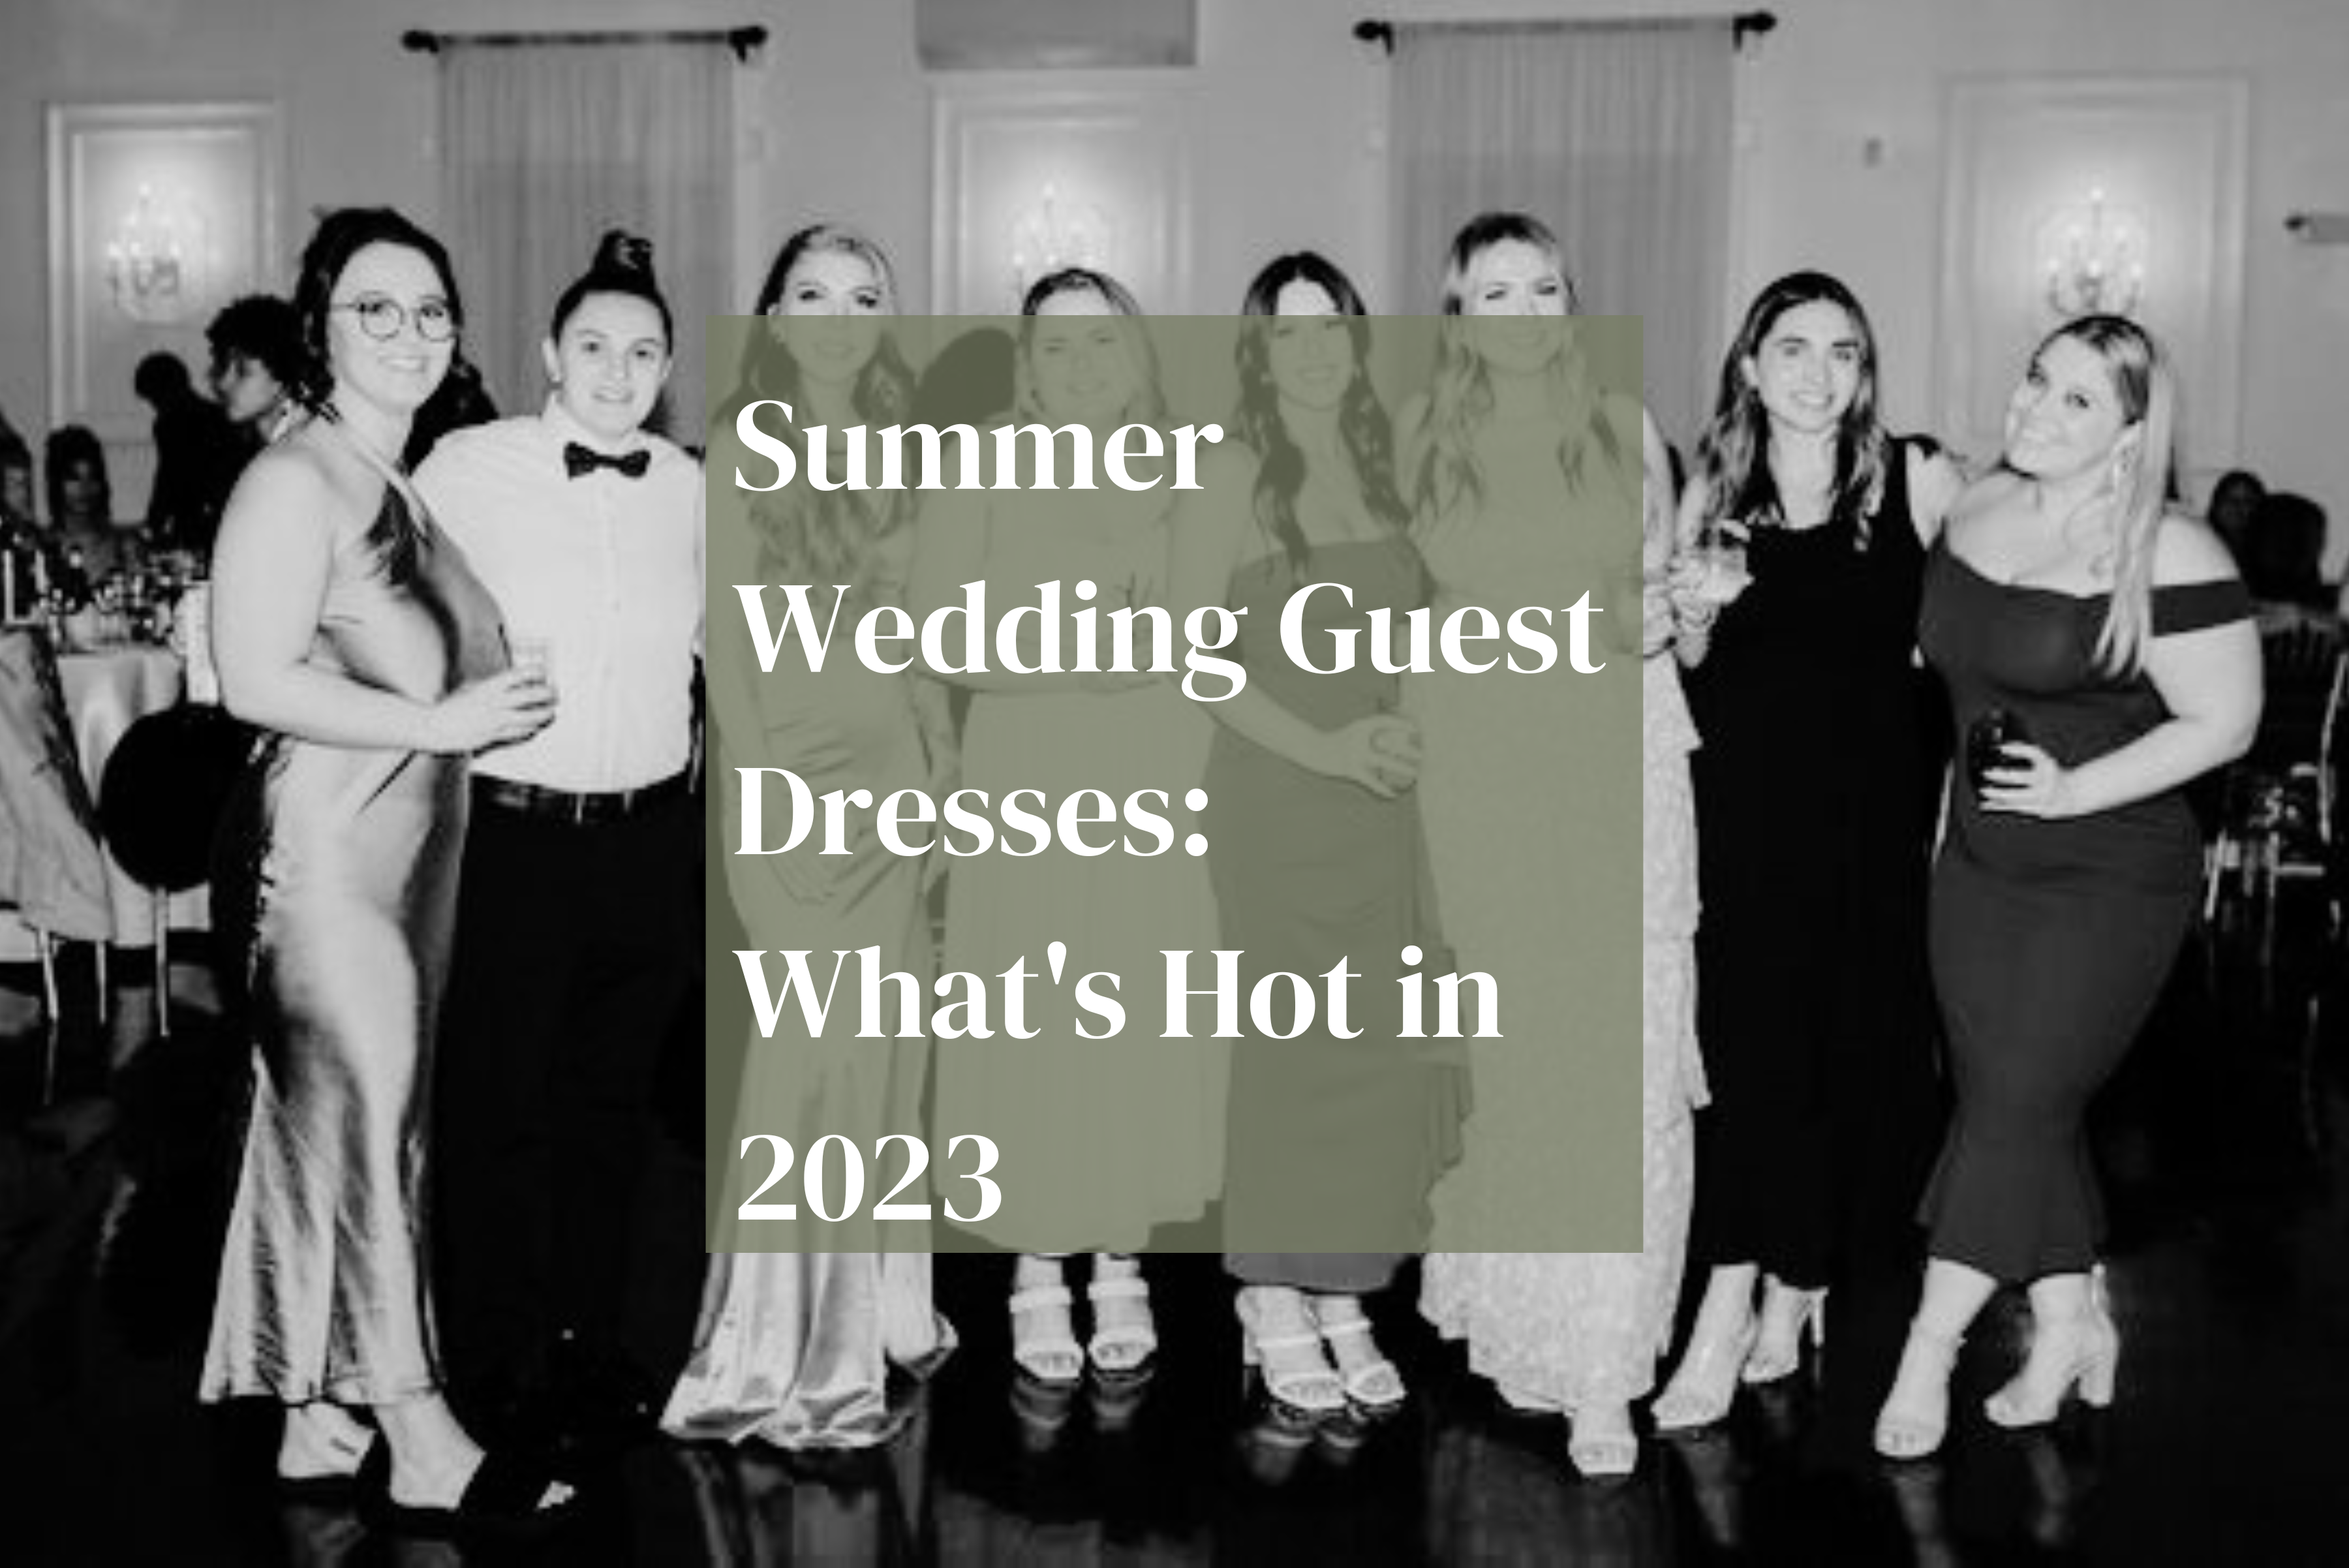 Summer wedding guest dresses feature image.